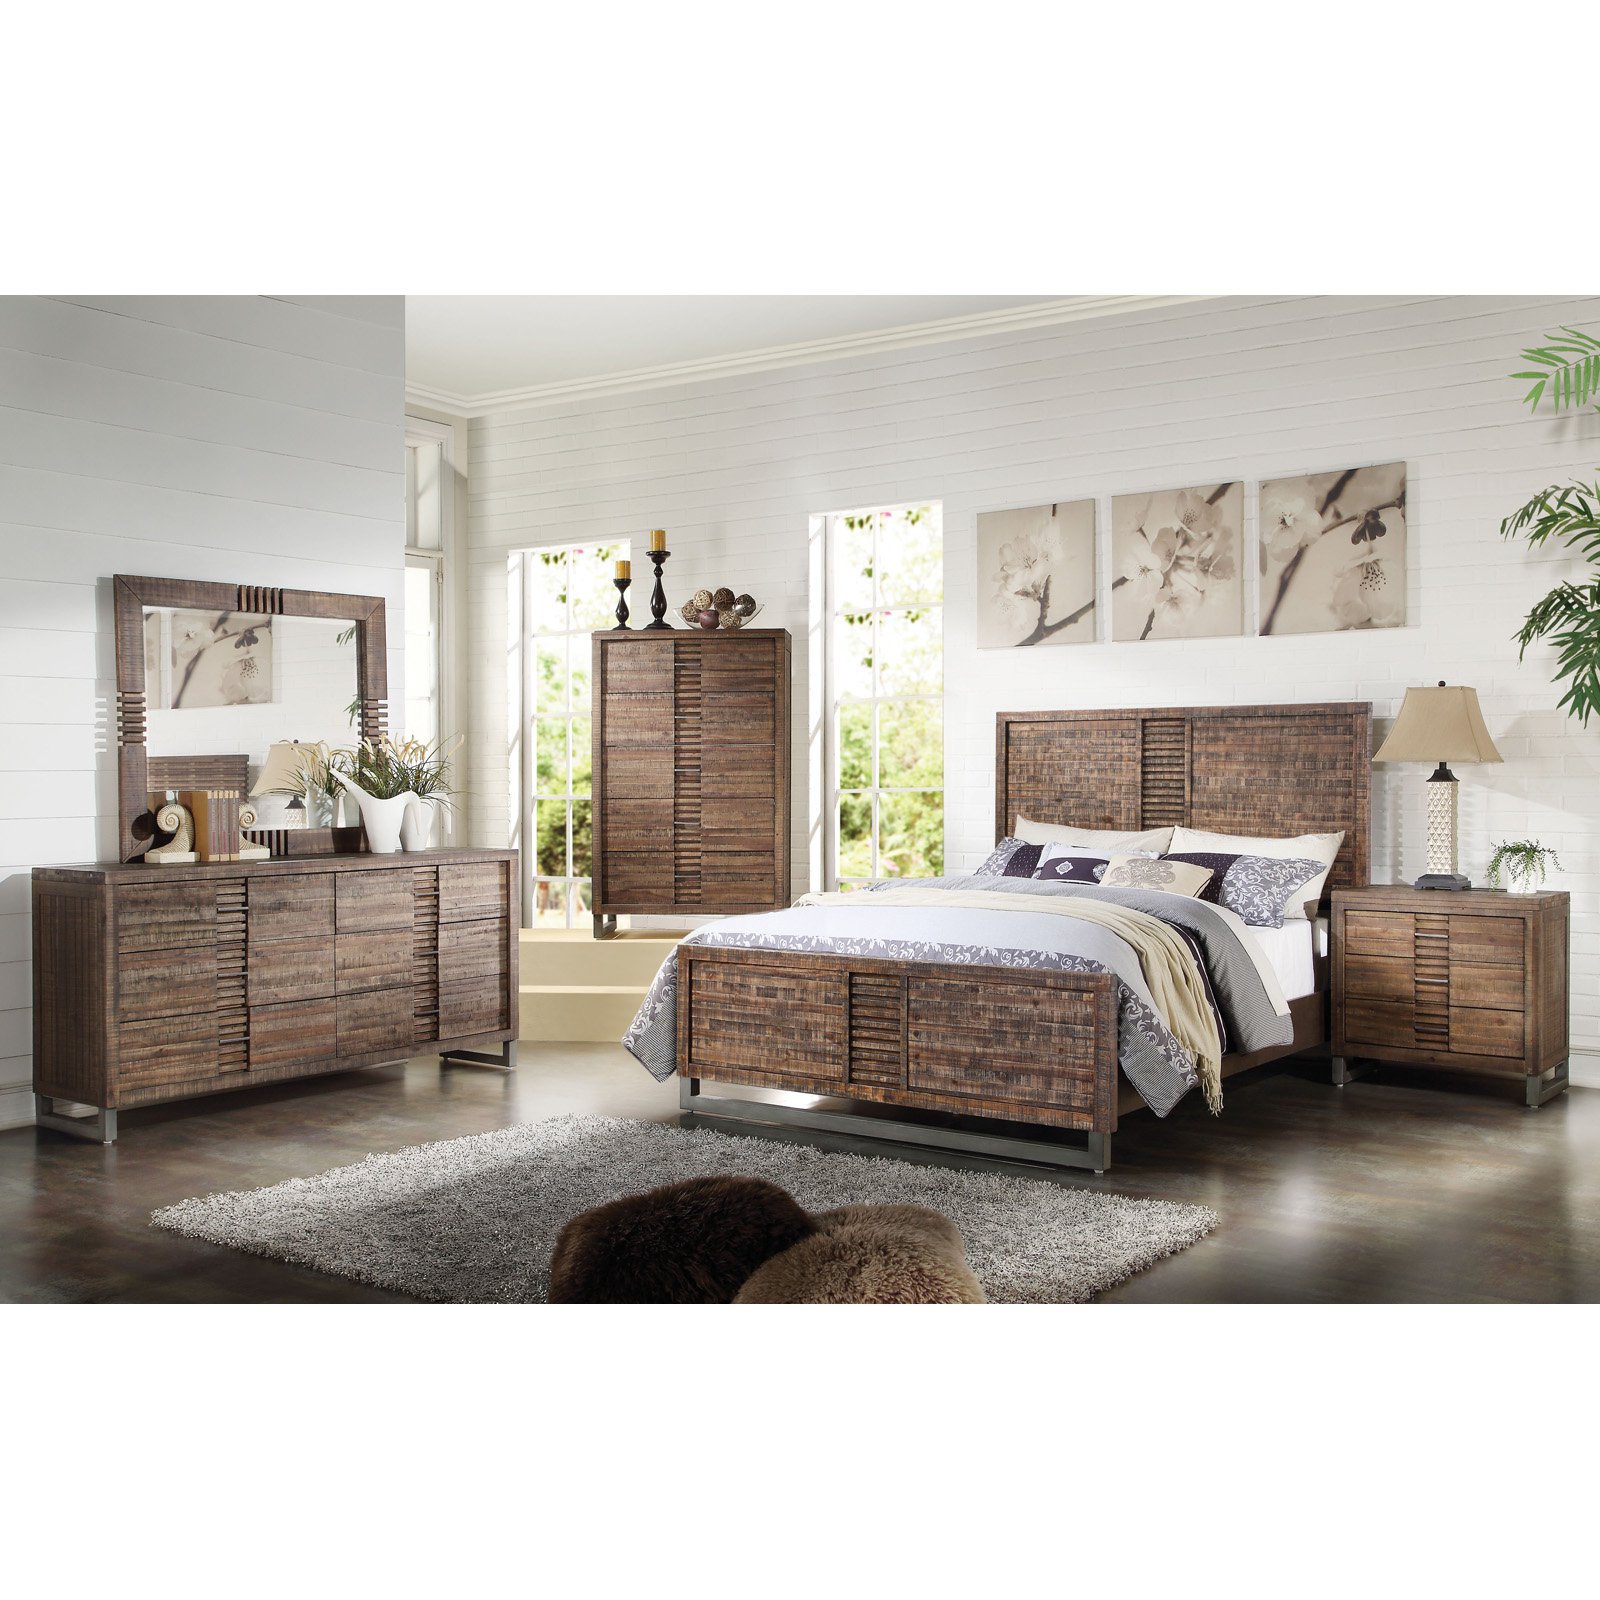 ACME Andria California King Panel Bed in Reclaimed Oak, Multiple Sizes - image 3 of 3